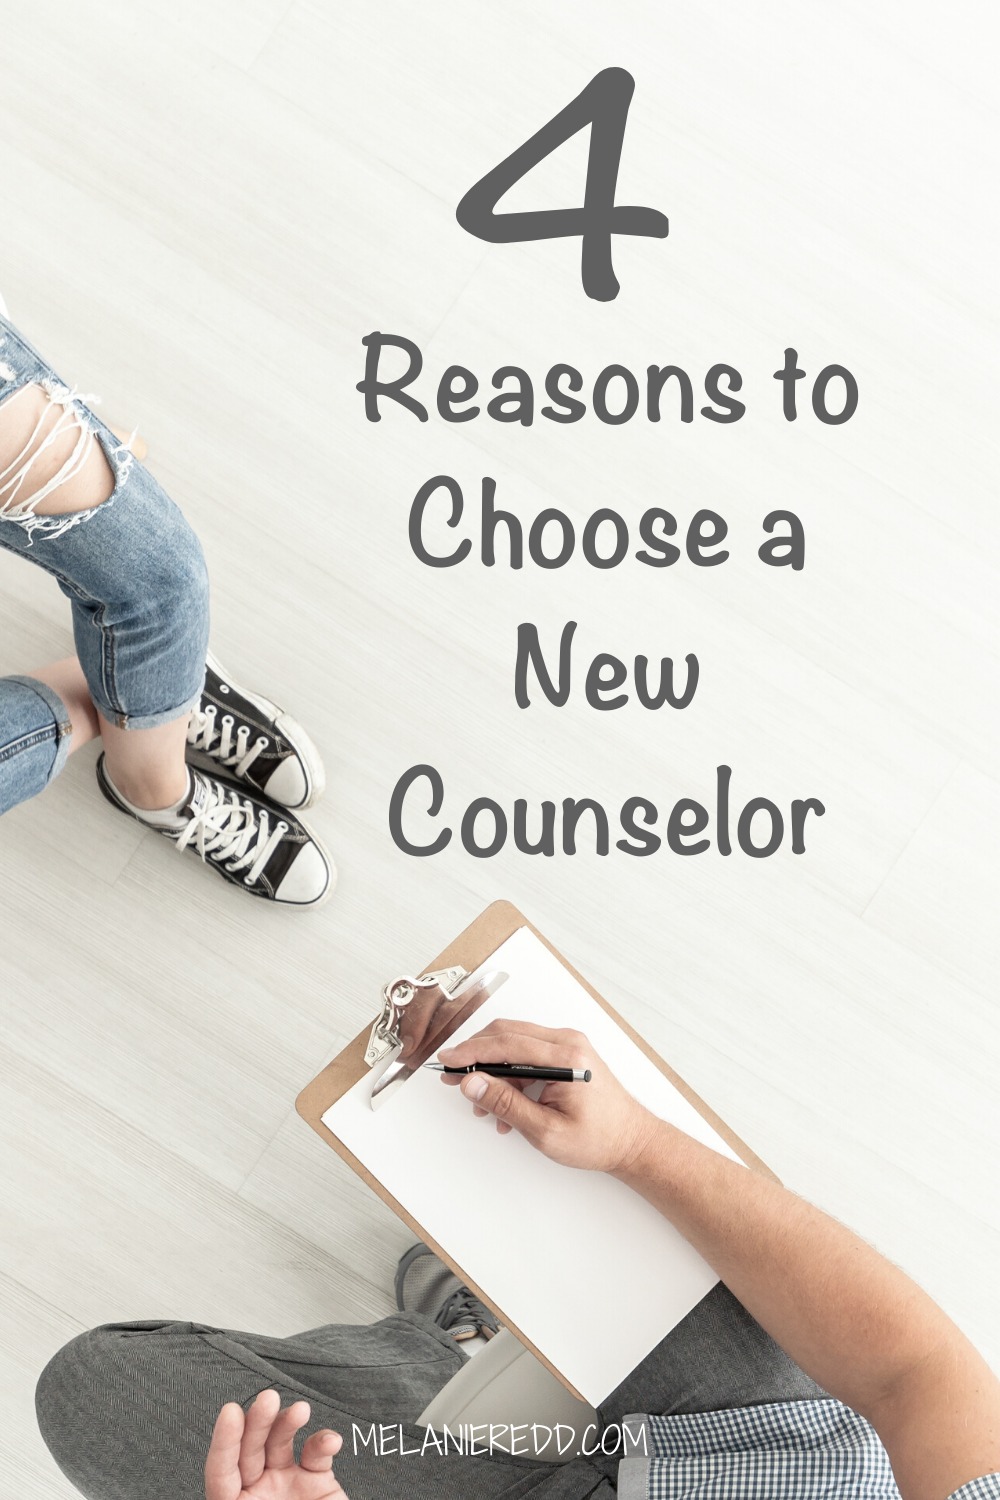 If you are taking the time & spending the money to seek guidance, you should feel good about your choice. Here are 4 reasons to choose a new counselor.